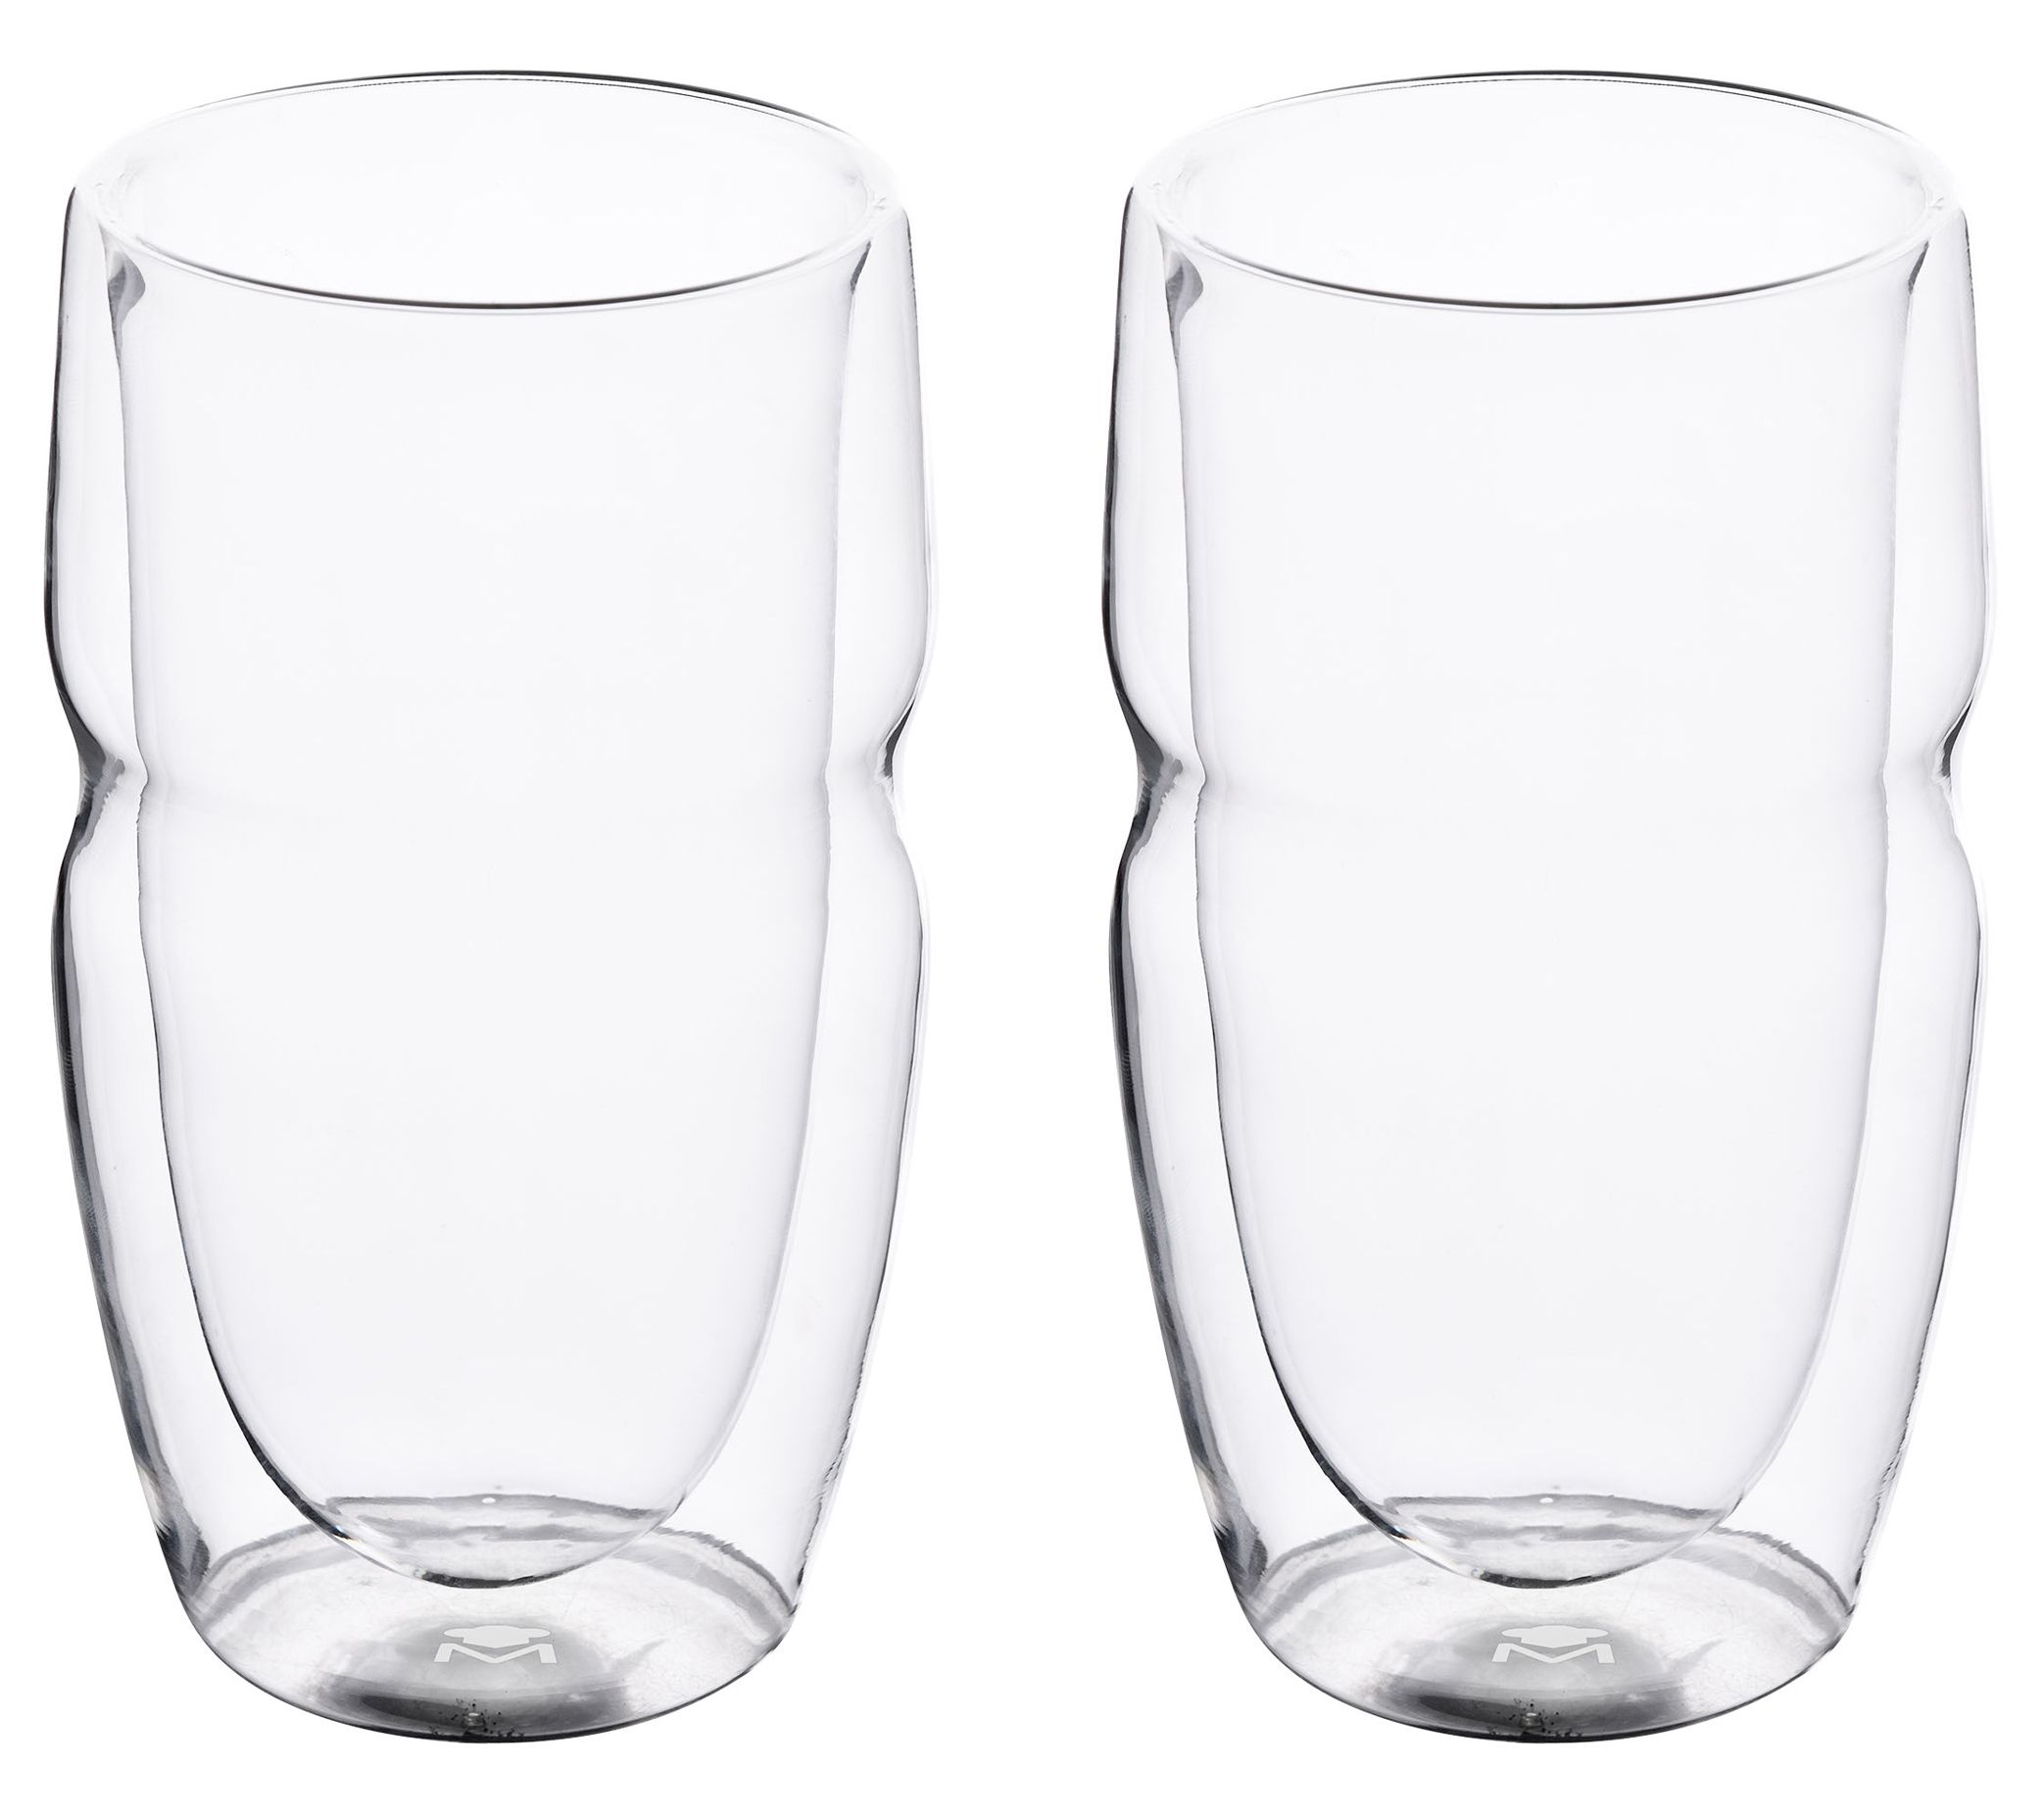 Libbey Craft Brews Nucleated 16 oz. Pint Beer Glasses & Reviews